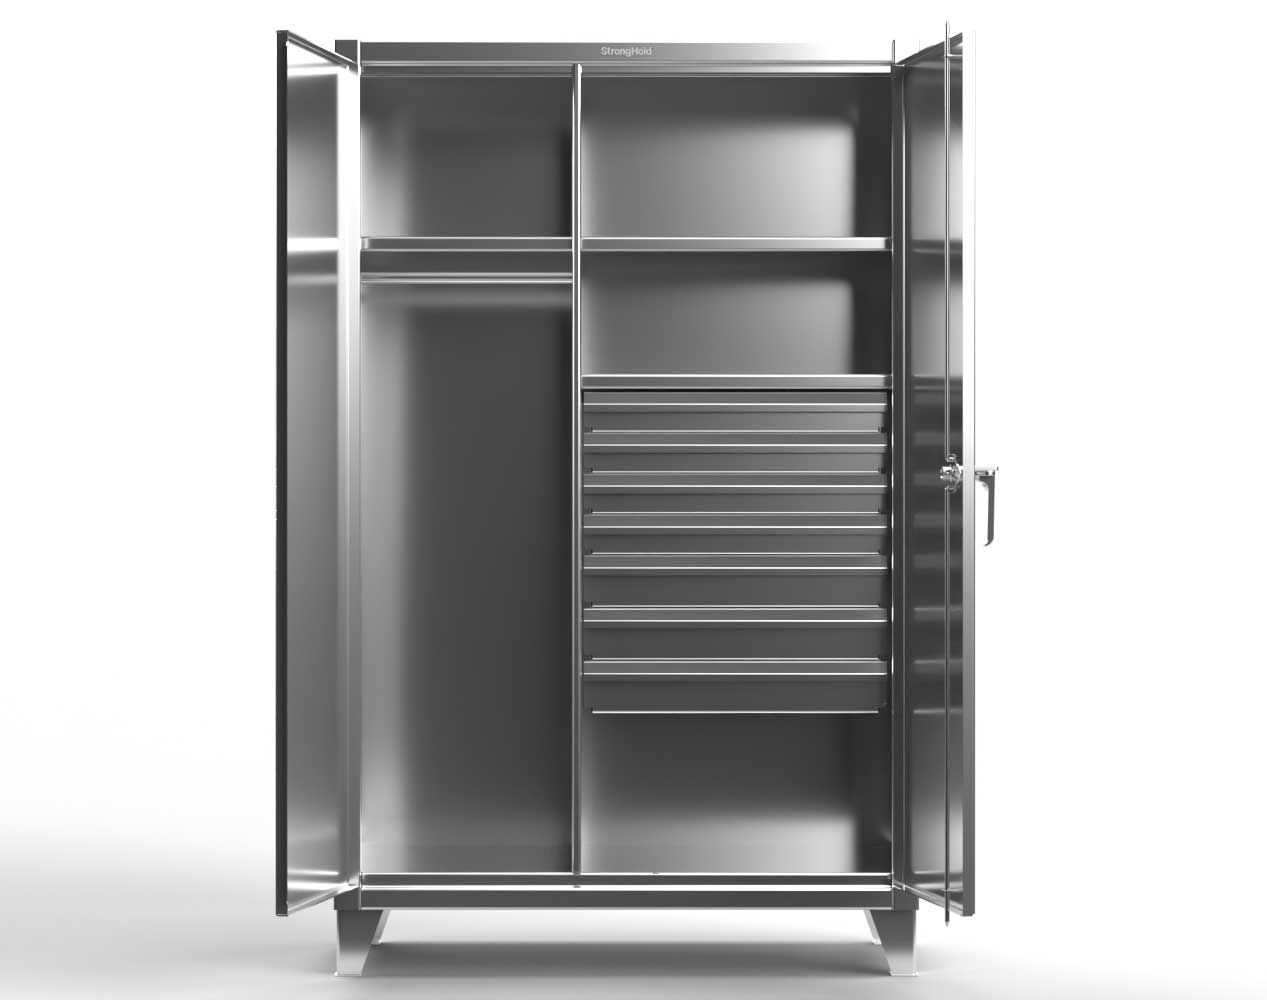 Extreme Duty 12 GA Stainless Steel Uniform Cabinet with 7 Drawers, 3 Shelves - 60 In. W x 24 In. D x 78 In. H